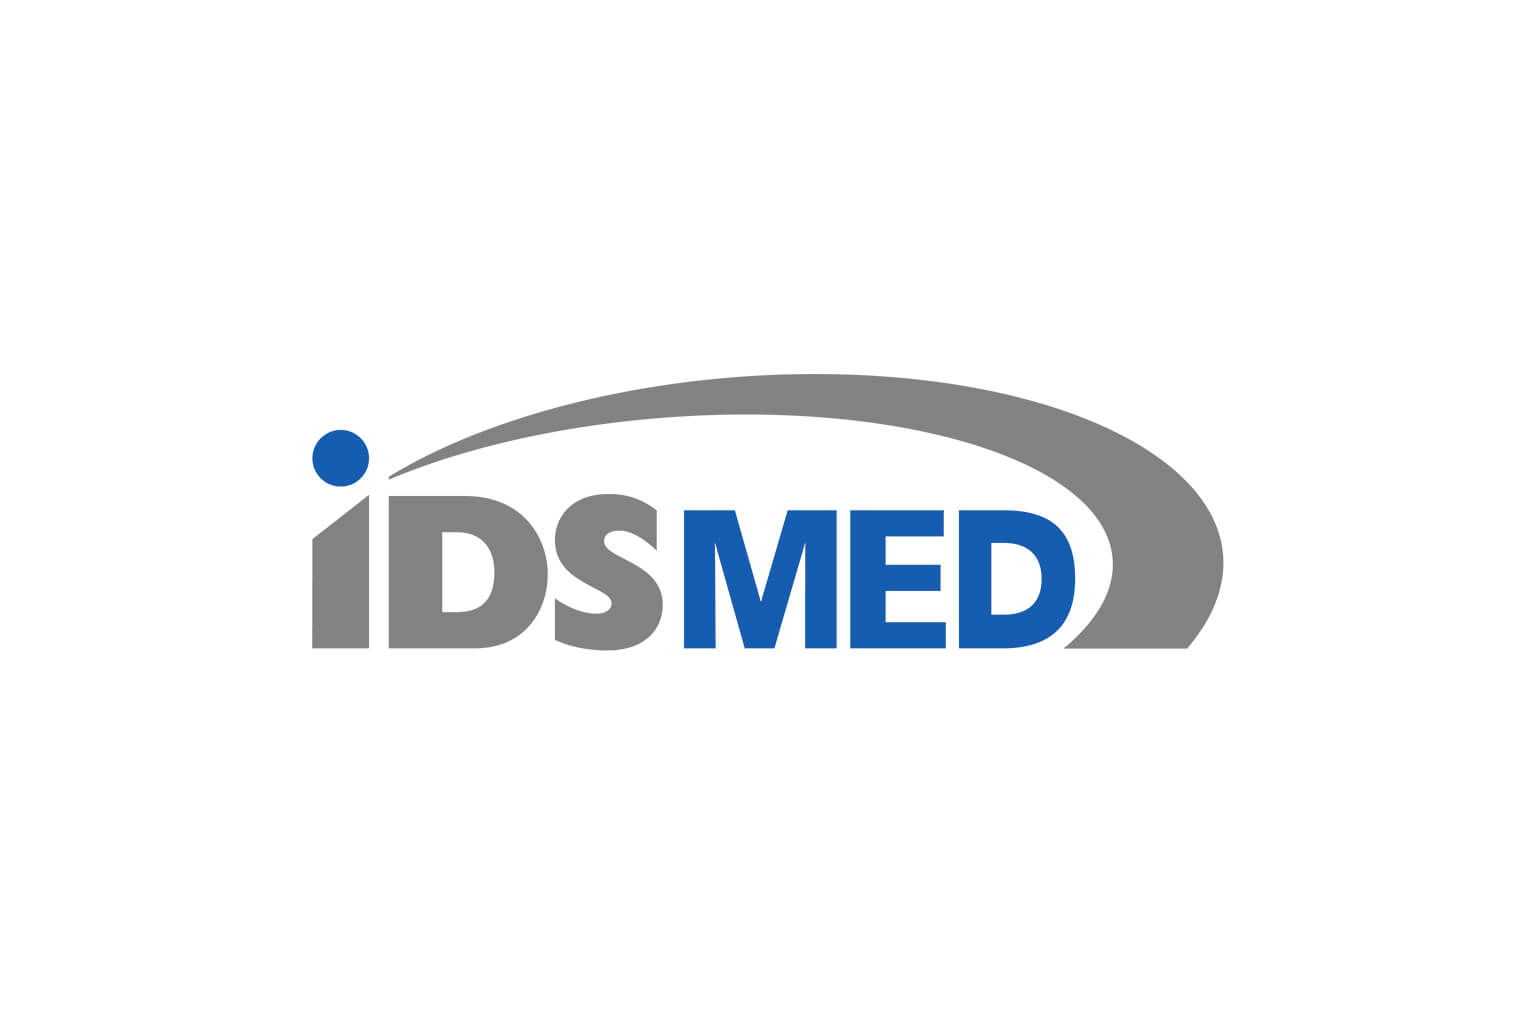 Idsmed